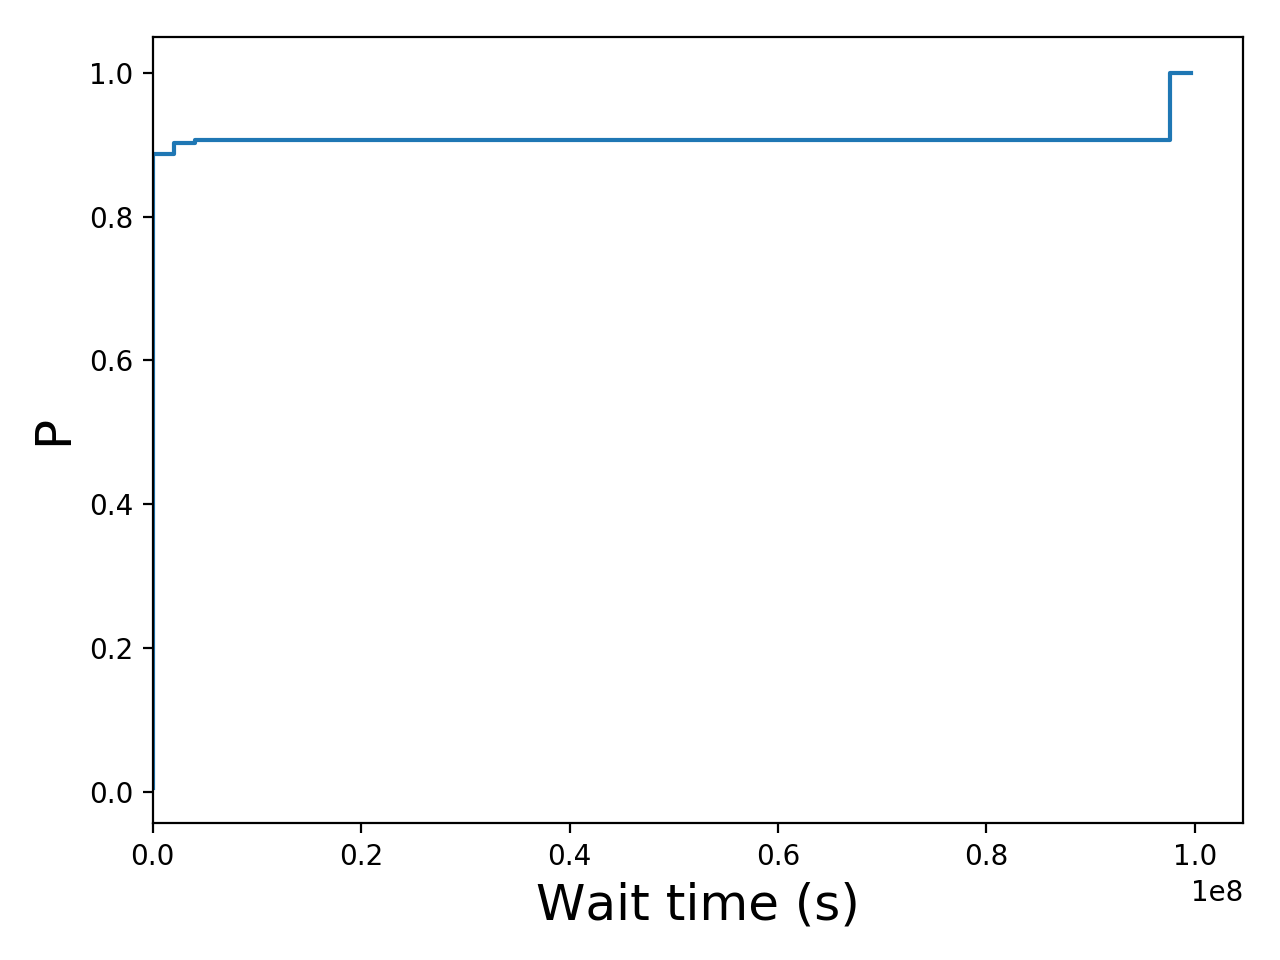 Task wait time CDF graph for the Pegasus_P7 trace.